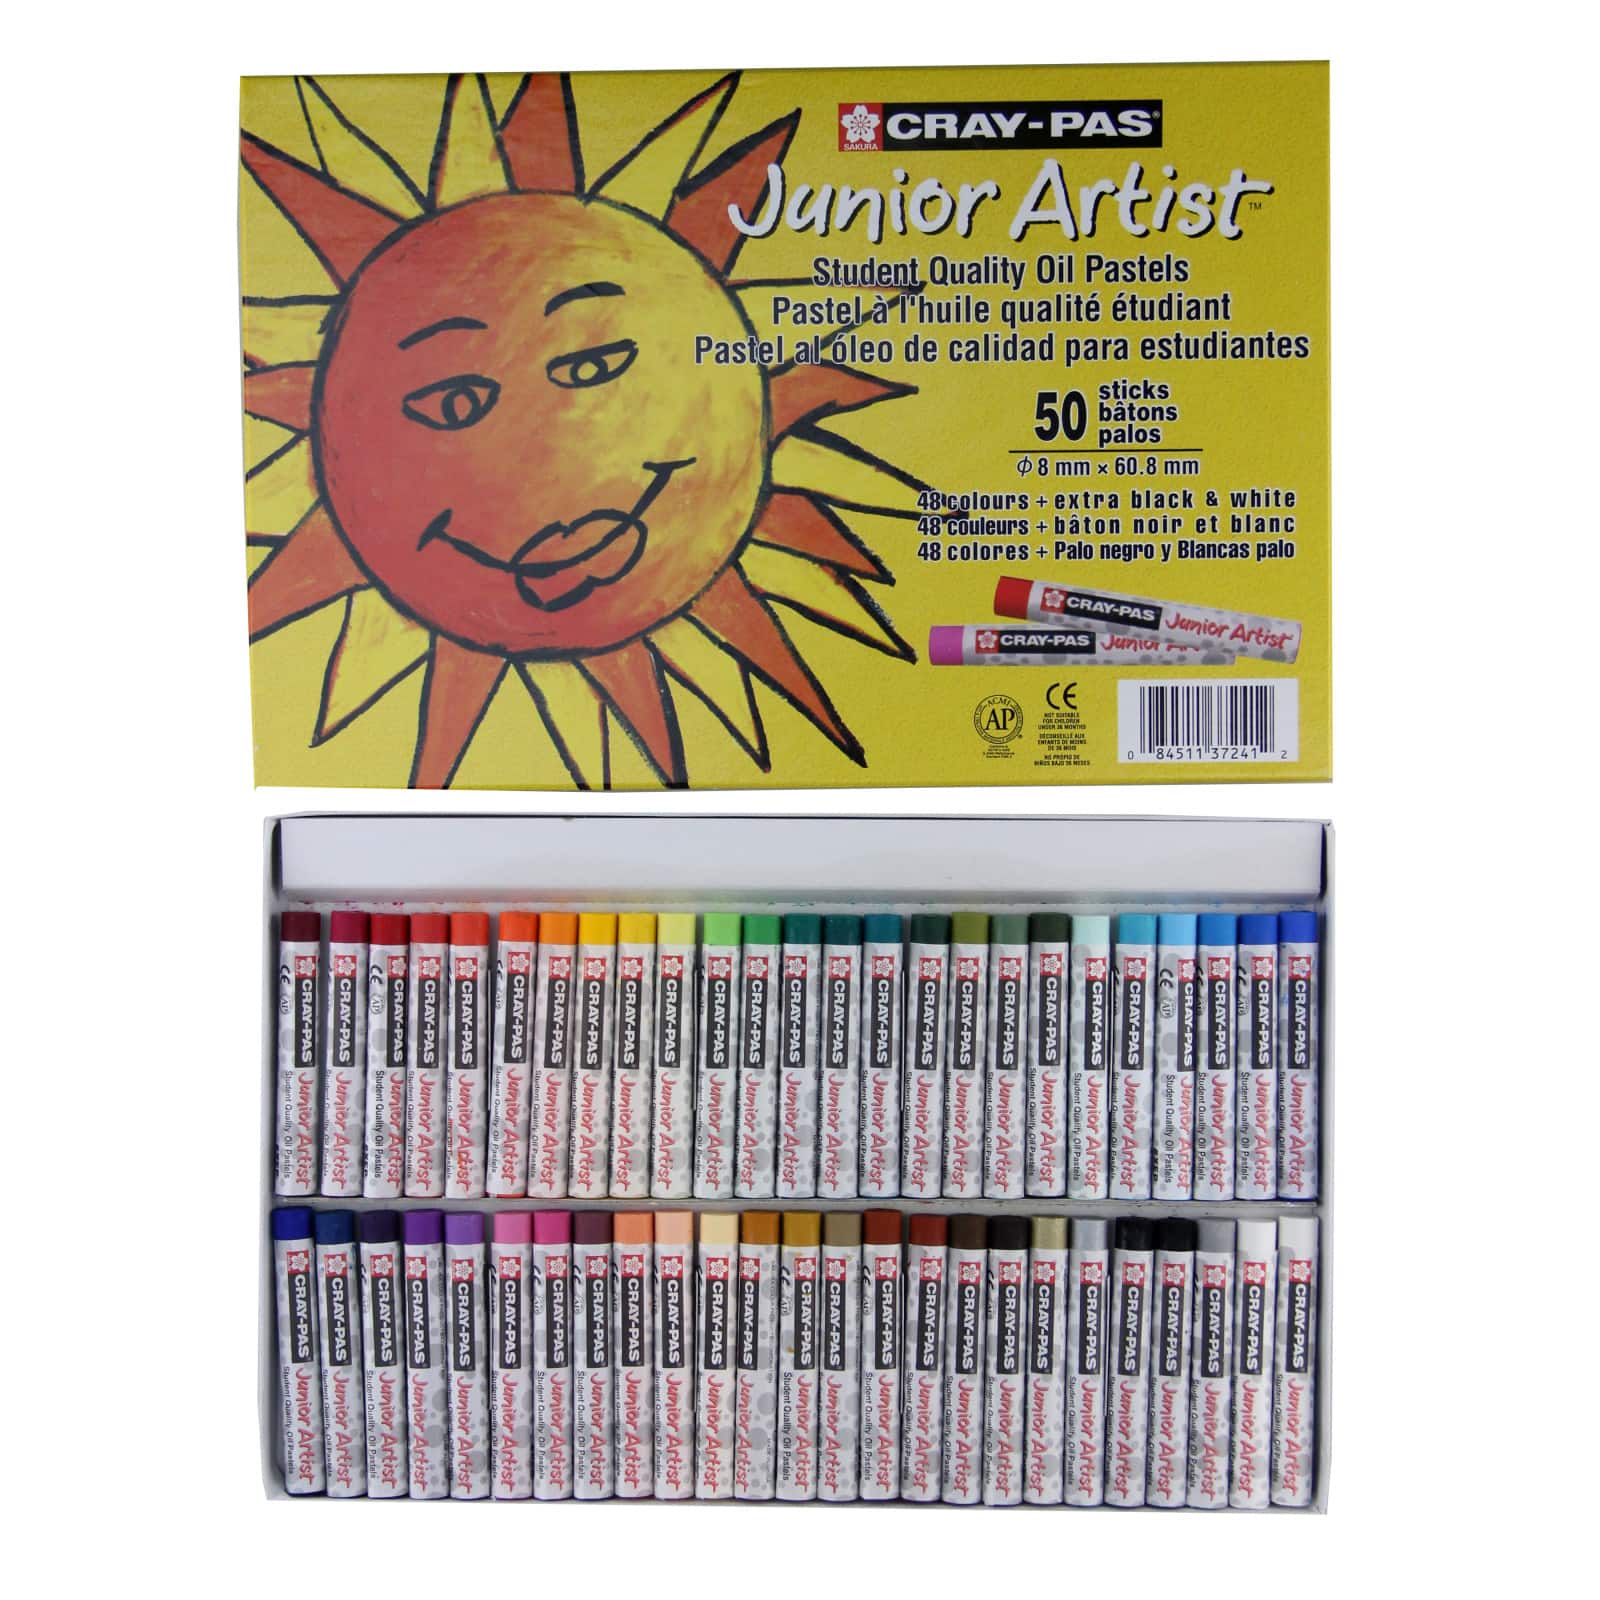  YNTCHENG Oil Pastels for Kids, Oil Pastels for Artists,Soft  Oil Pastels Set Of 48 Colors, Pastels Art Supplies For Professional  Drawing.Contain Pastel Pad : Arts, Crafts & Sewing